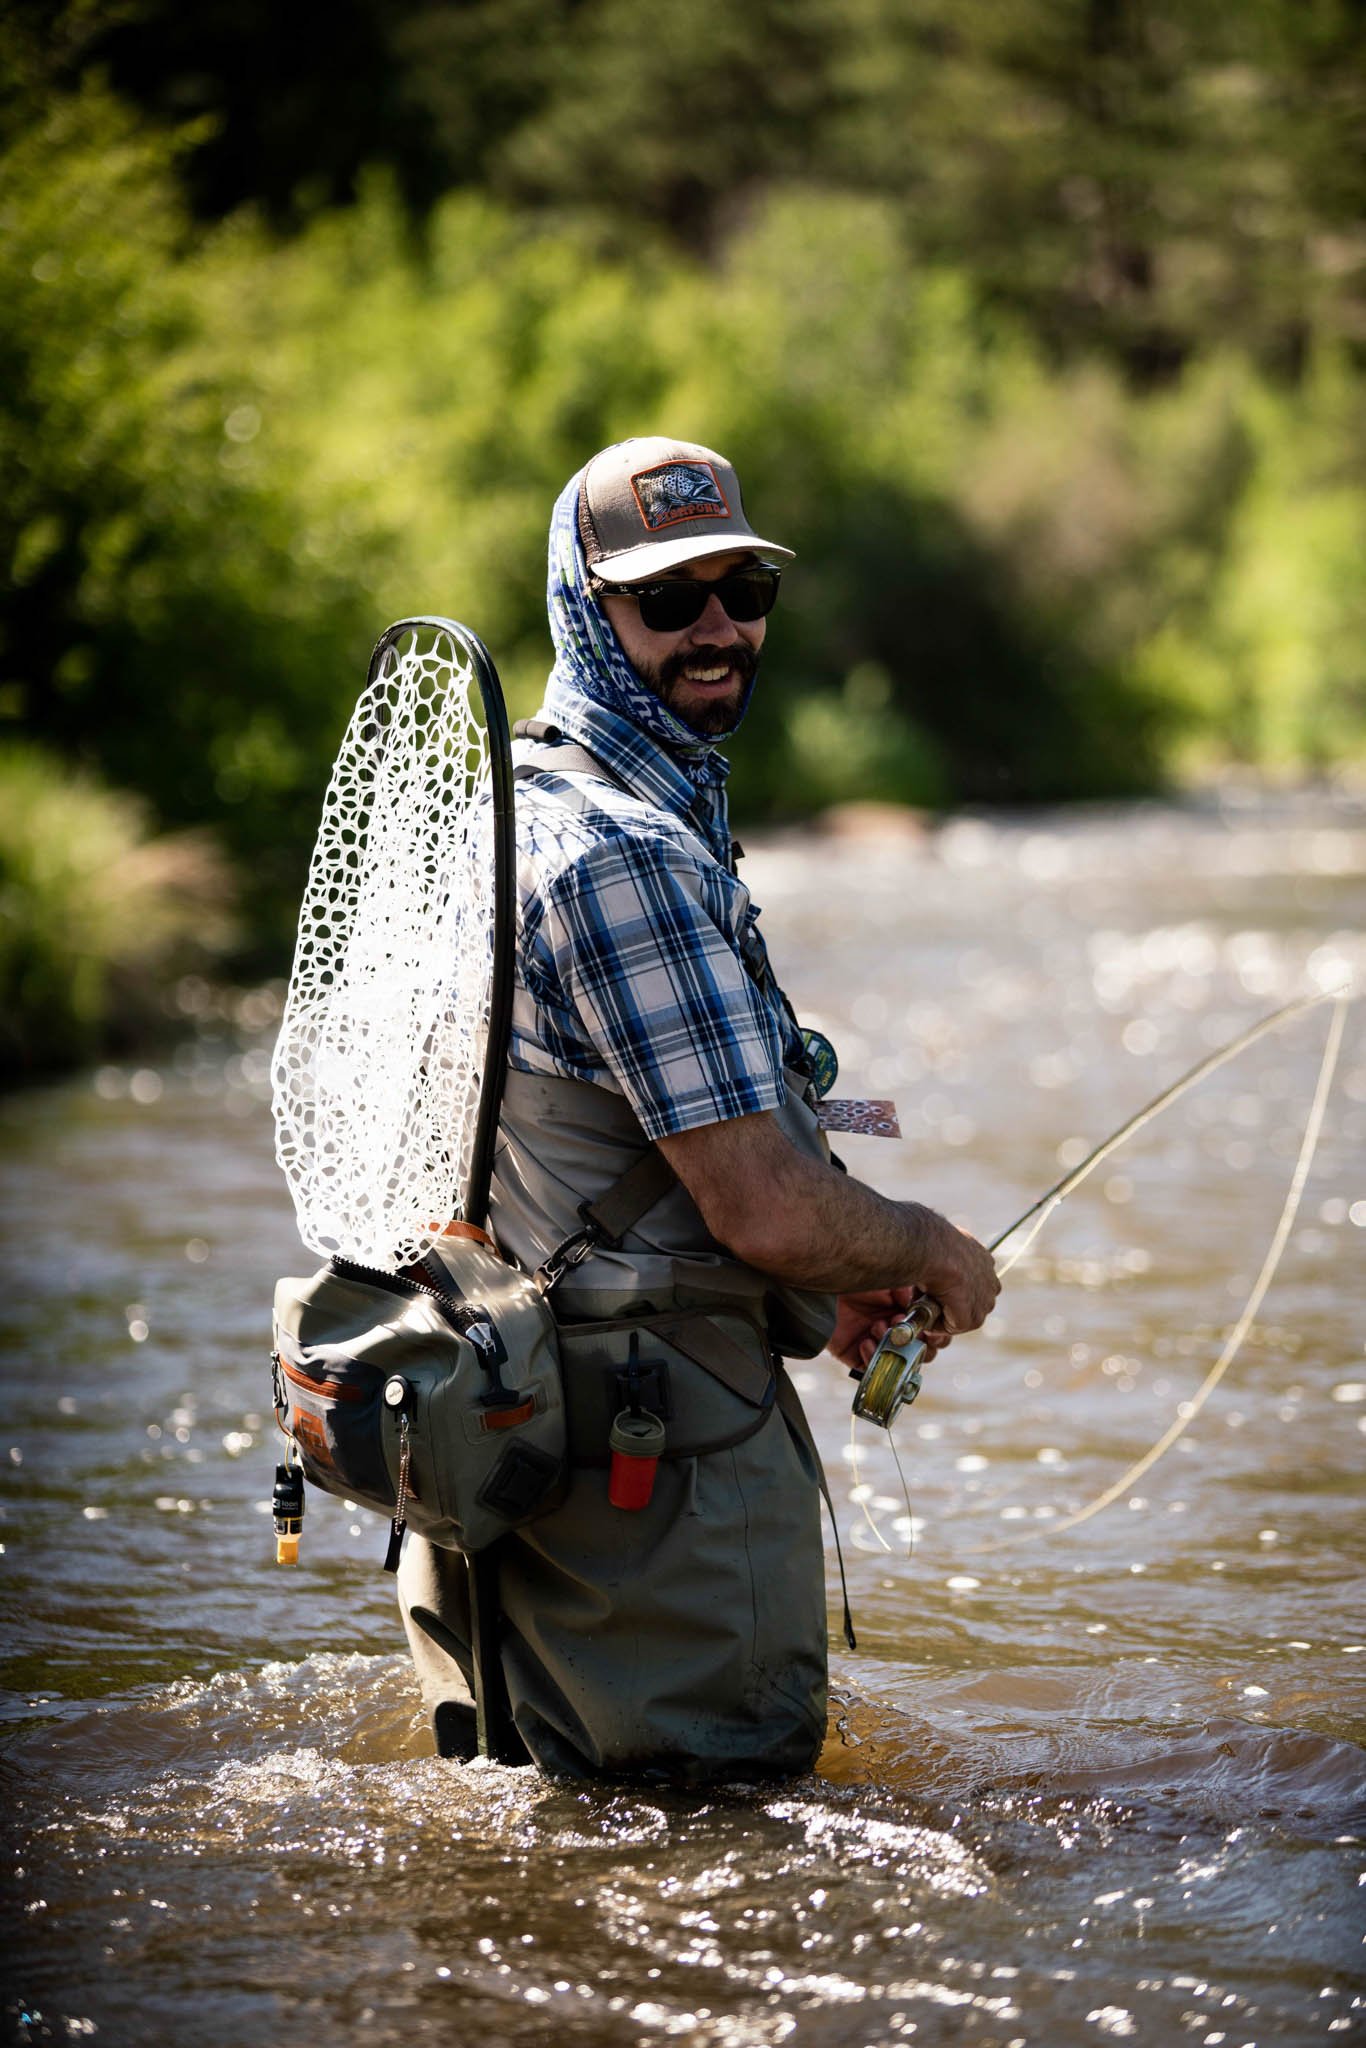 Guide to Fly Fishing